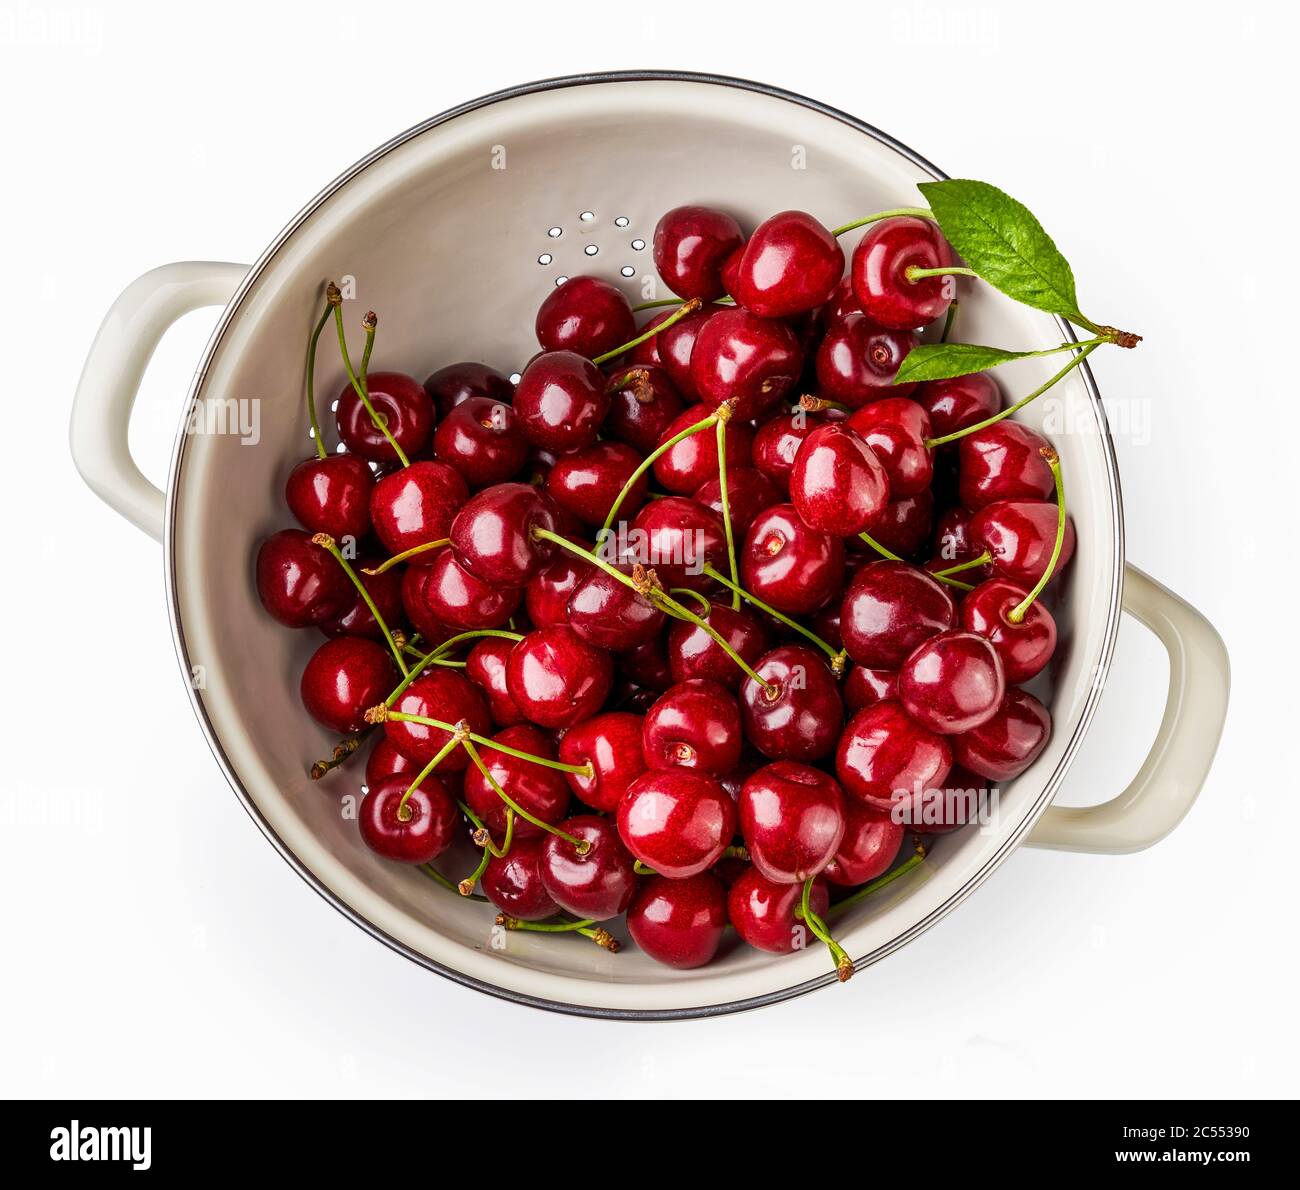 White strainer with fresh cherries isolated on a white background. Top view of colander with berries. Stock Photo